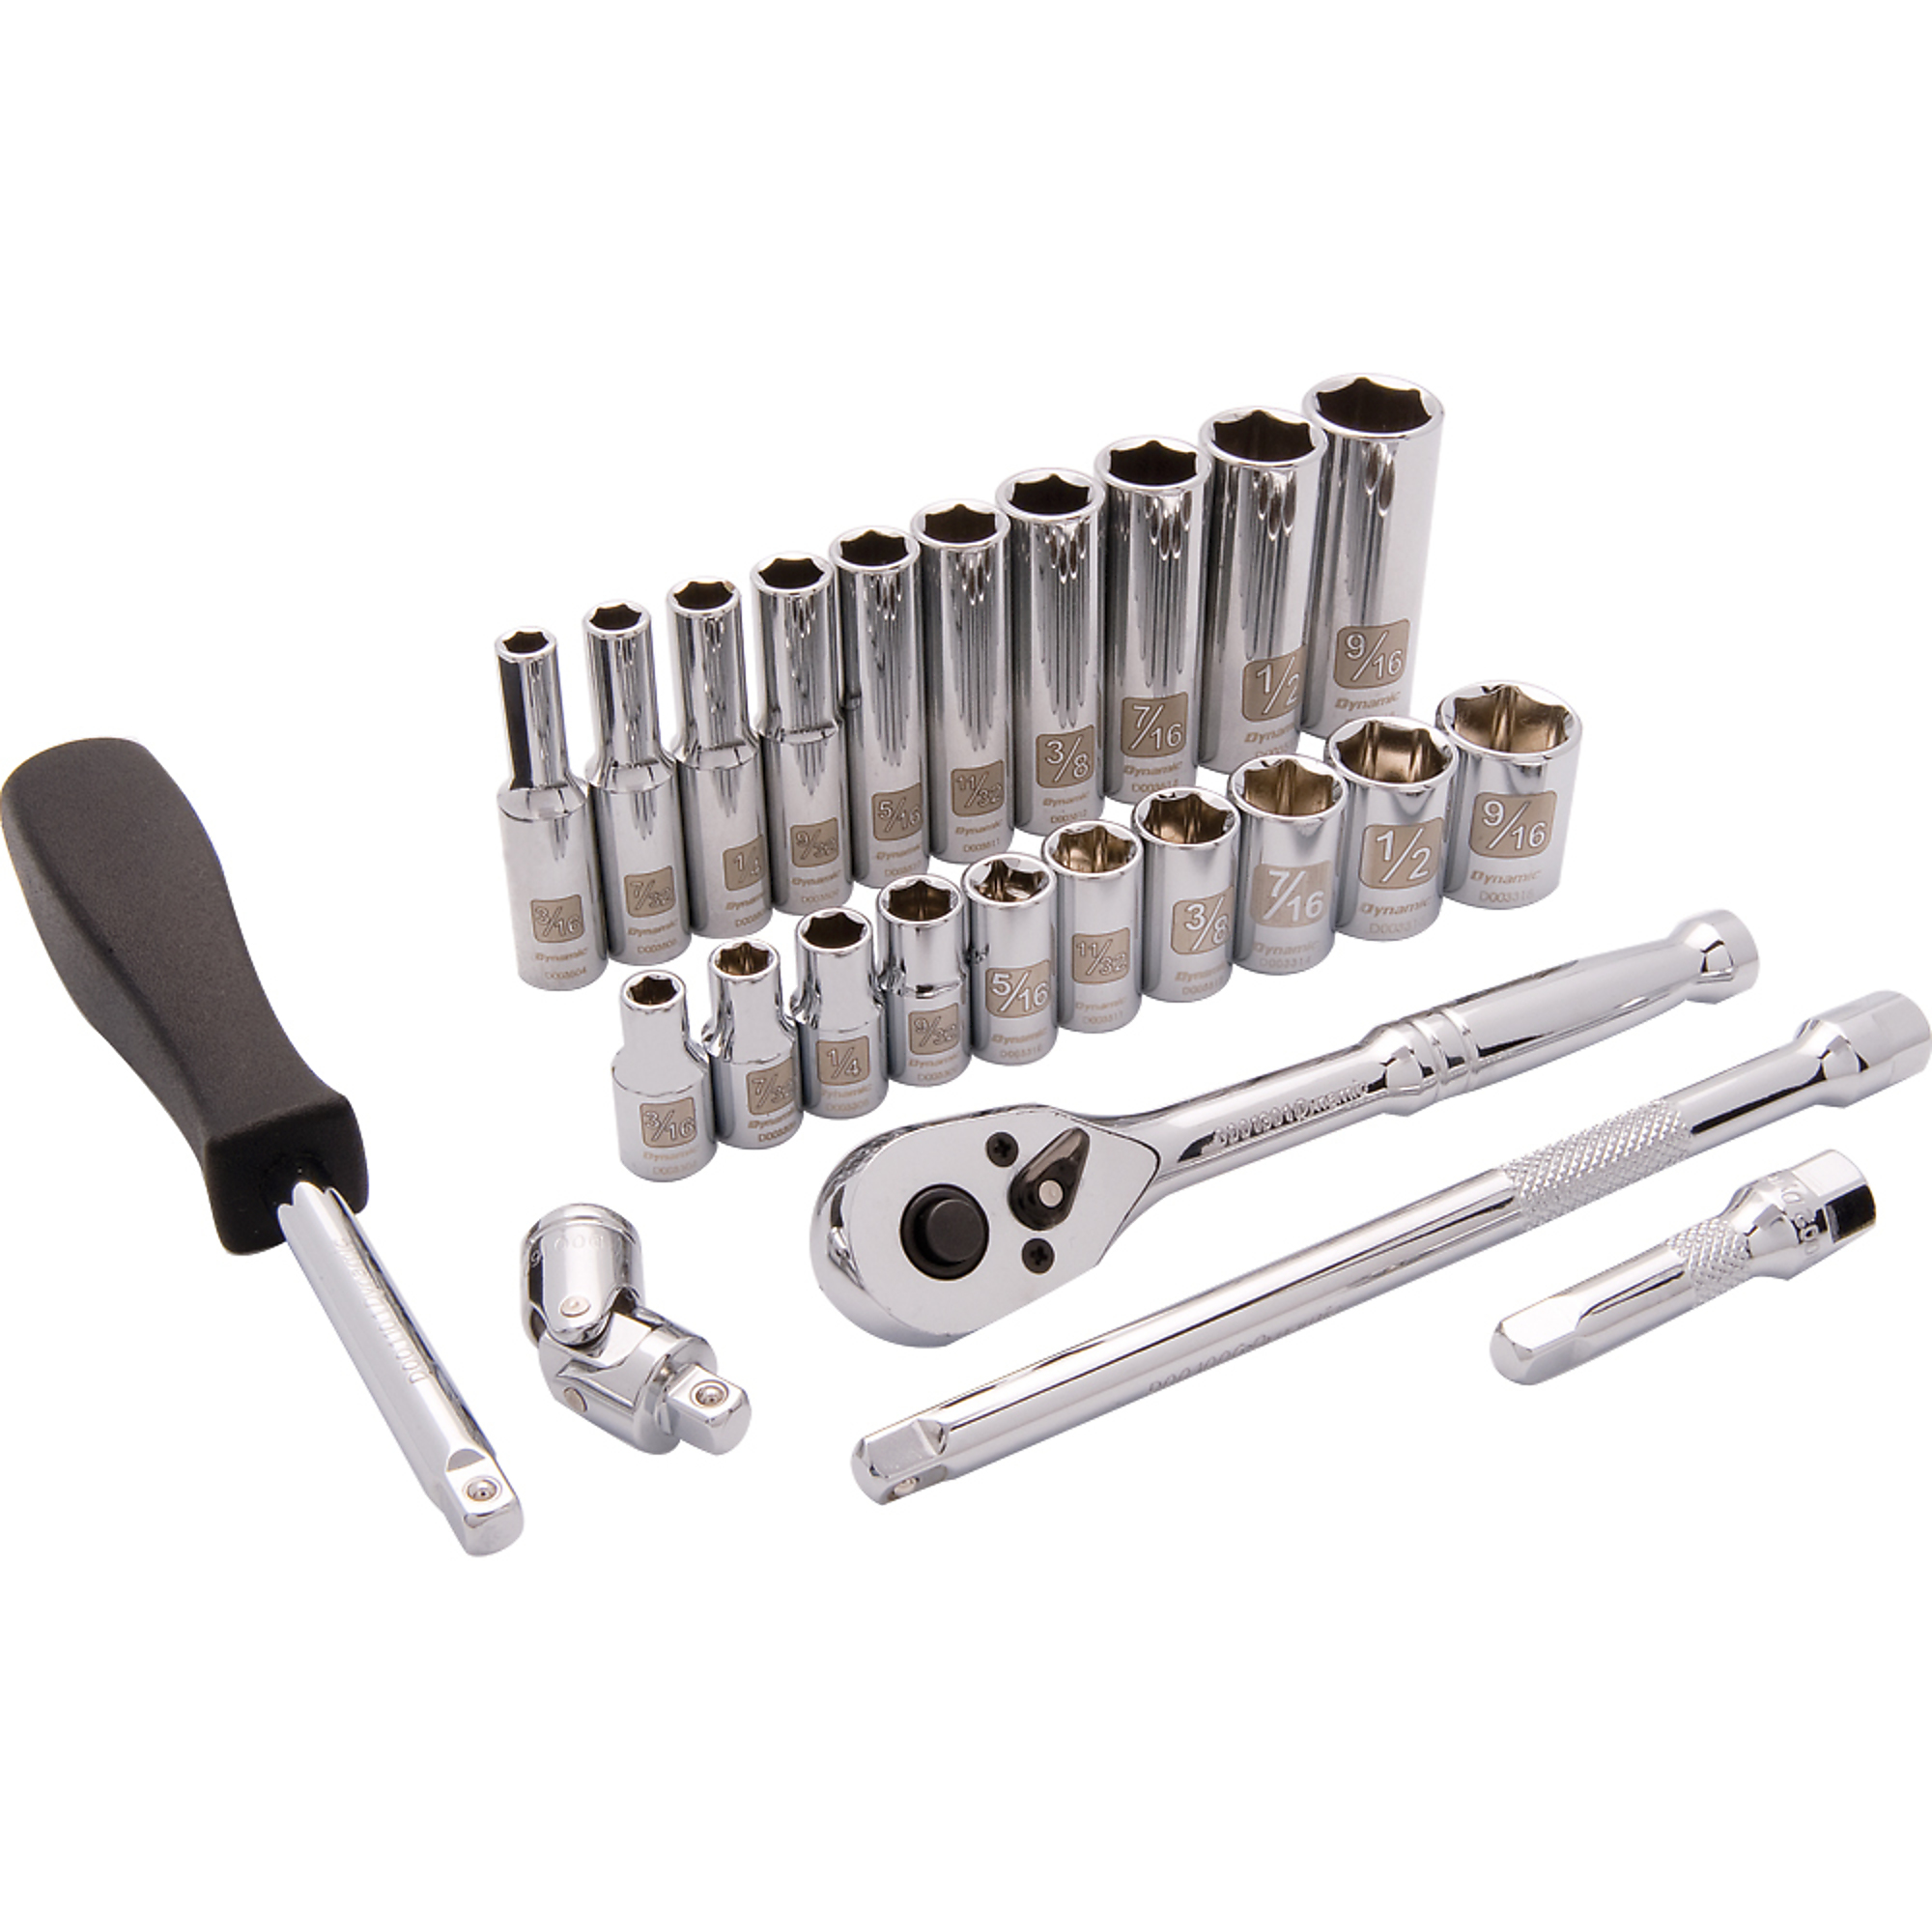 Dynamic Tools, 1/4Inch 6 Point SAE Standard/Deep Socket Set, Measurement Standard Standard (SAE), Pieces (qty.) 25 Socket Set Type 1/4Inch Drive Sets,